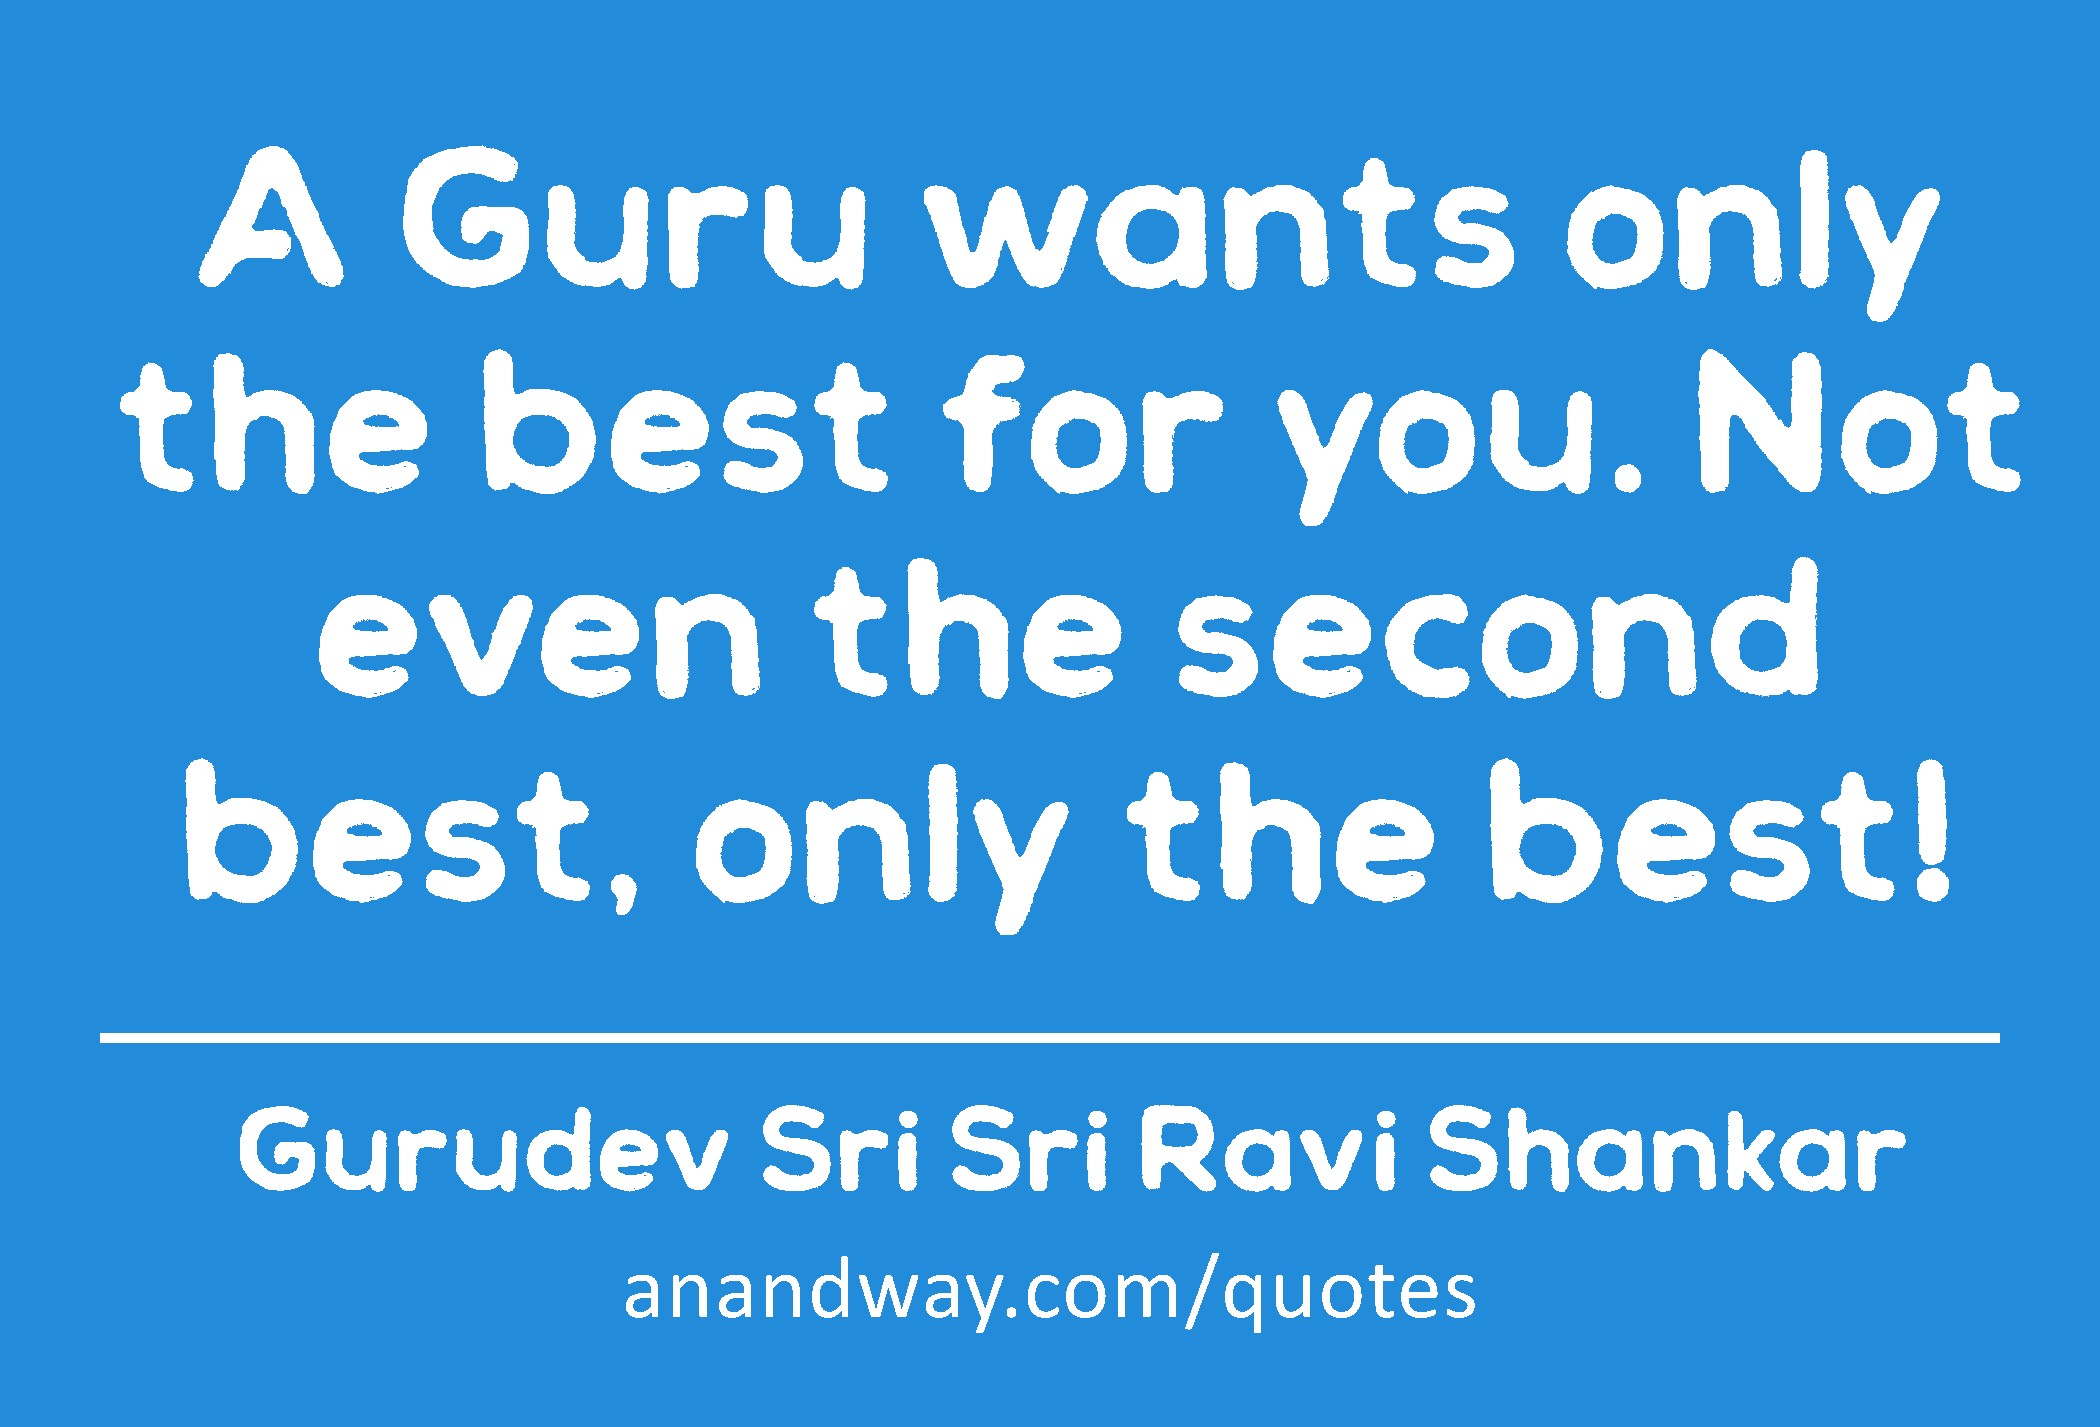 A Guru wants only the best for you. Not even the second best, only the best! 
 -Gurudev Sri Sri Ravi Shankar